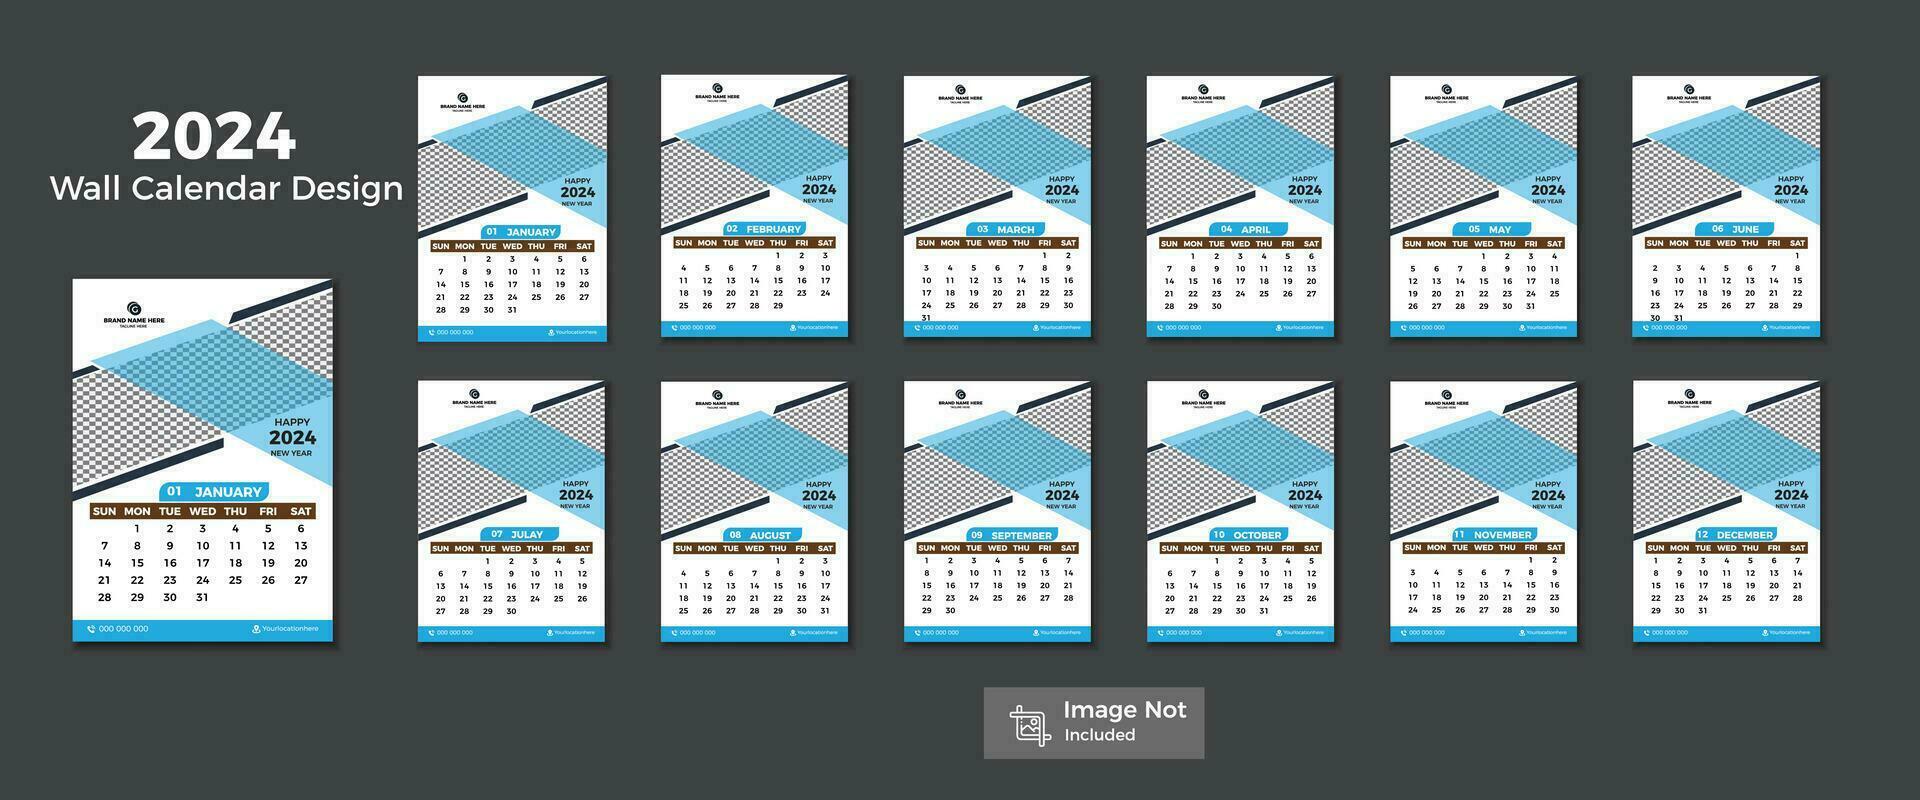 New Trendy Wall Calendar Design template For 2024 in Vector Size.